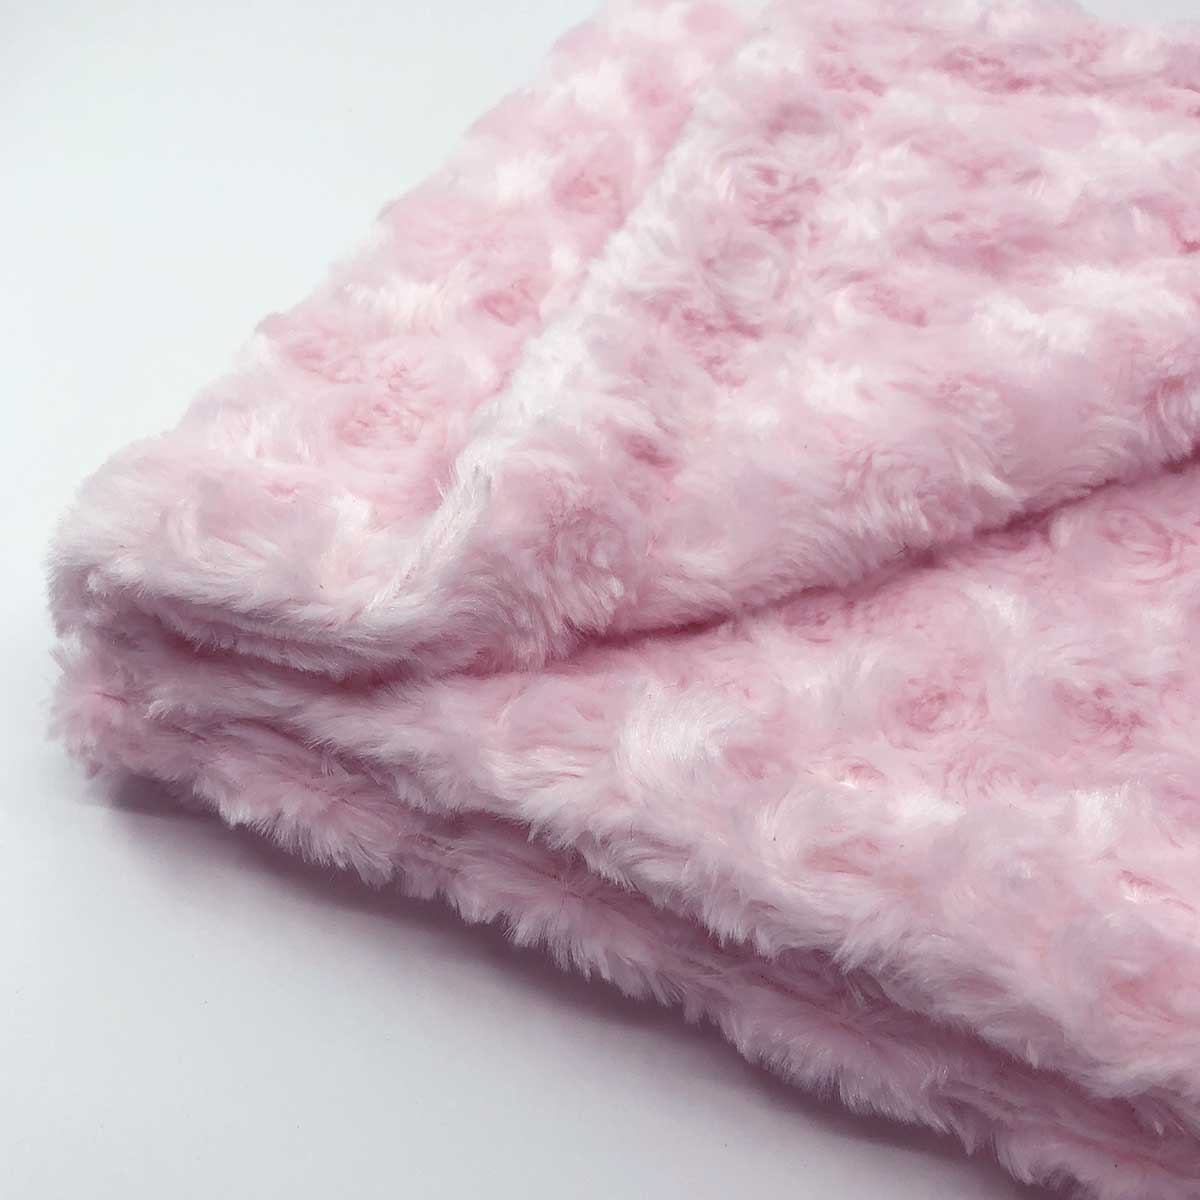 Minky Pet Blankets in Pink Rosette Pattern | Pawlicious & Company